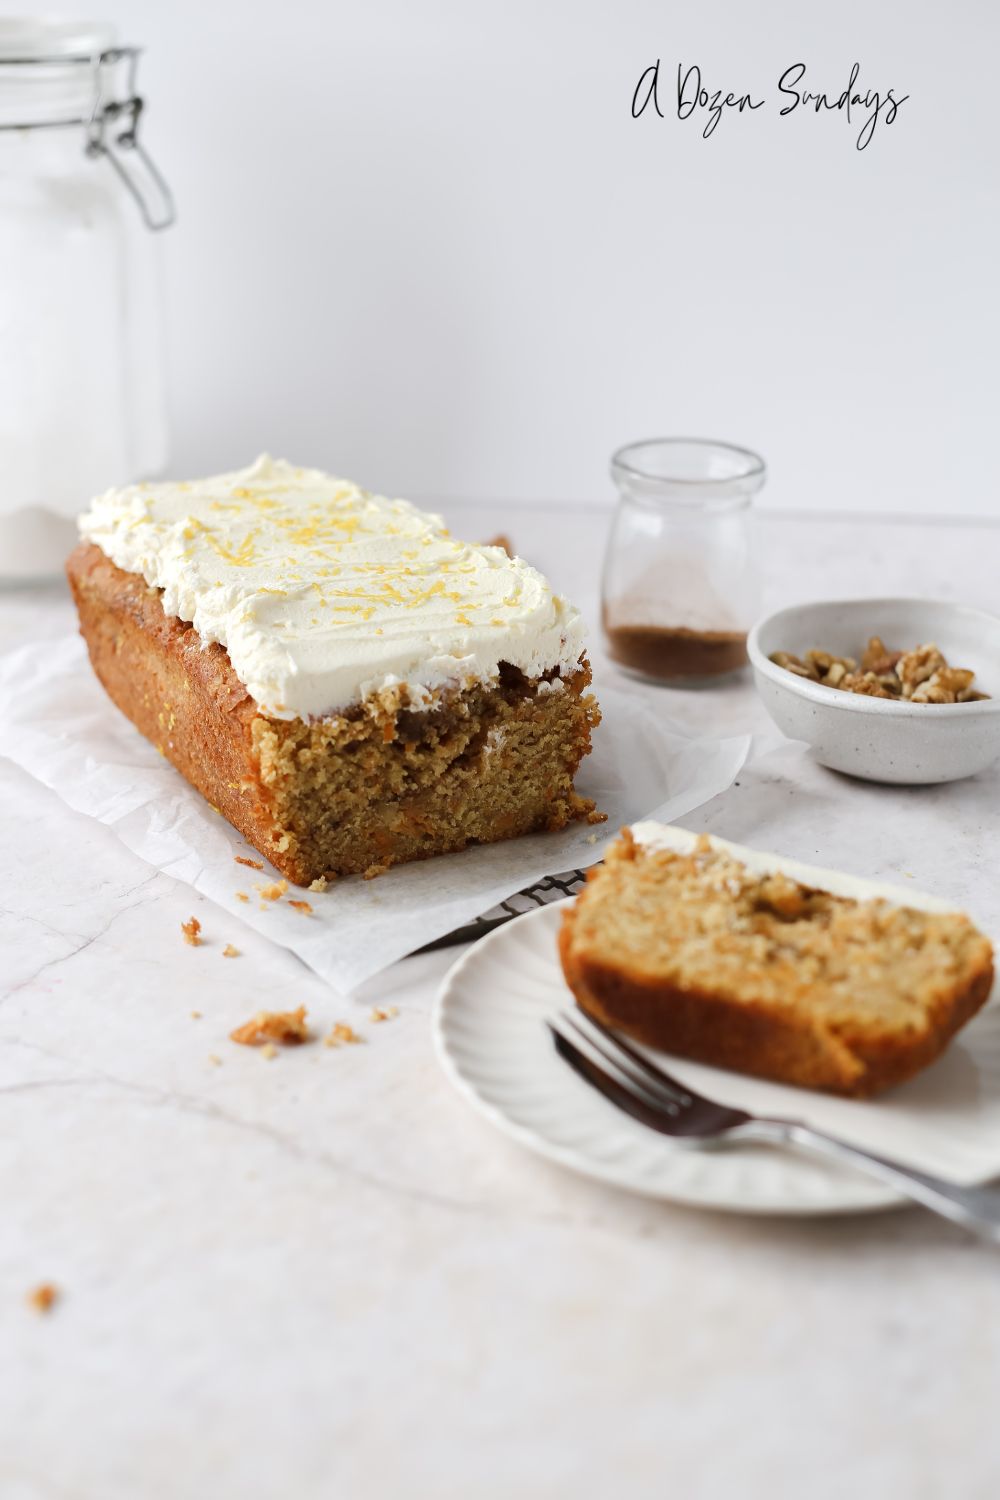 Carrot and Walnut Loaf Cake with Lemon Buttercream Frosting